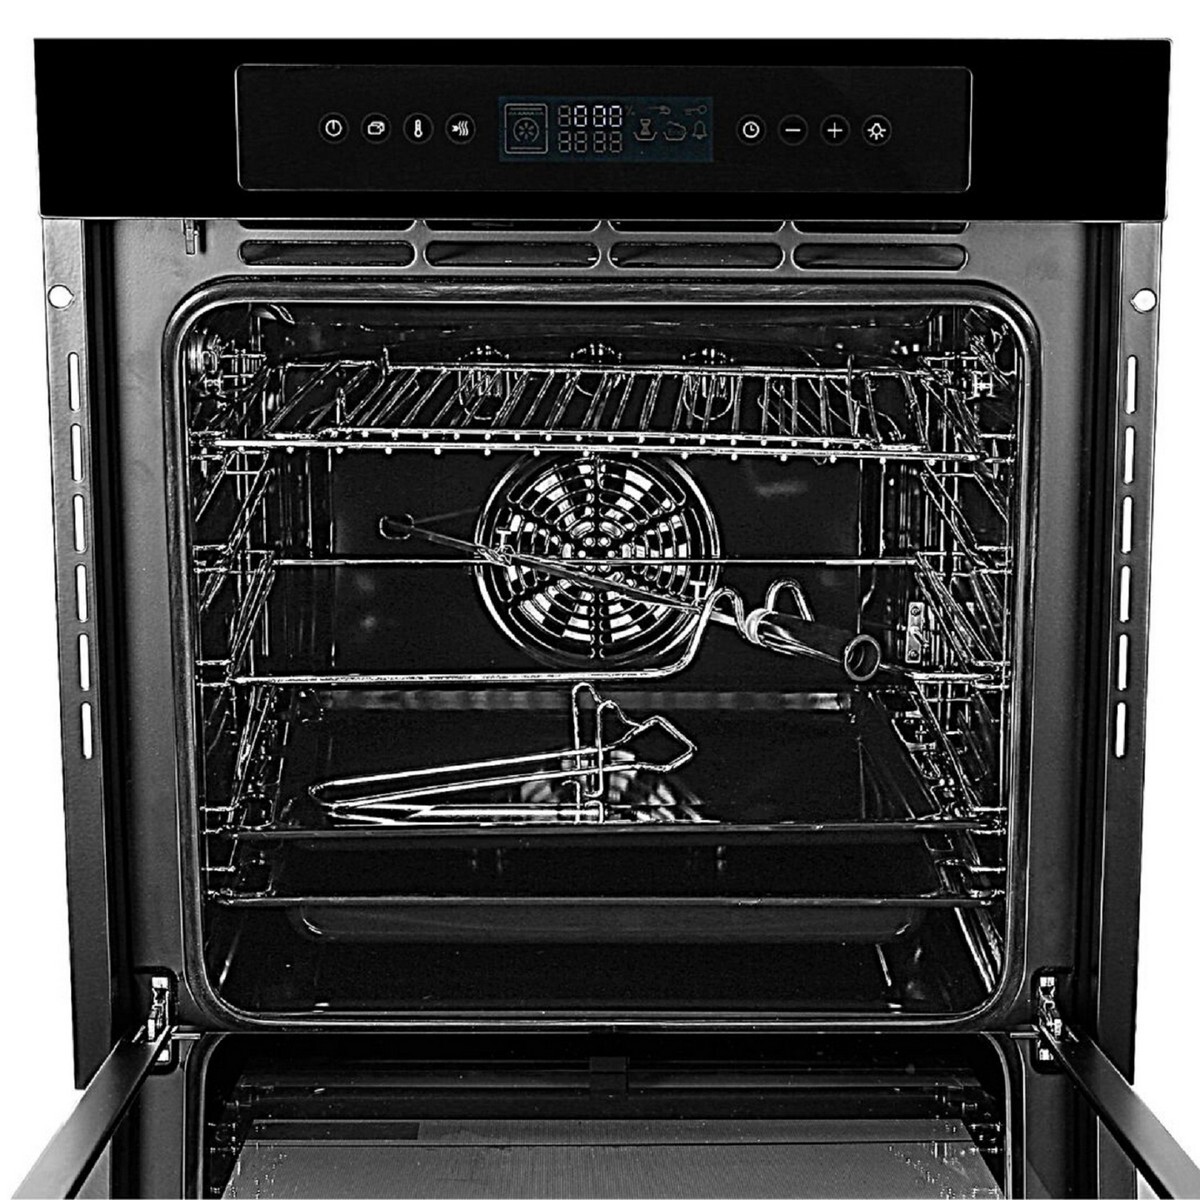 Faber Built In Oven FBIO 80L 10F BS with ART